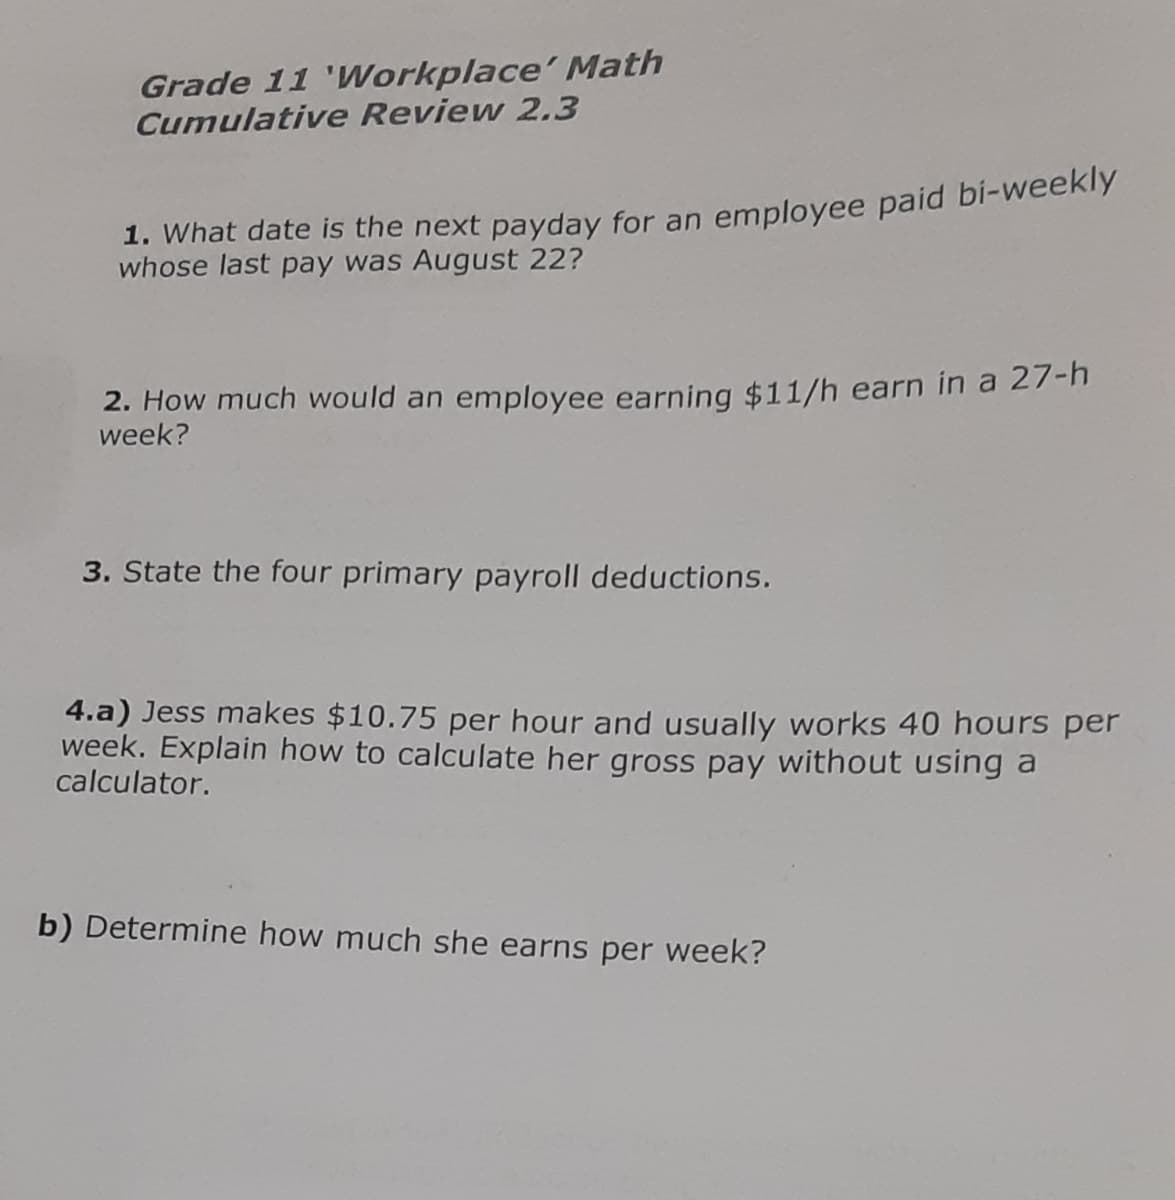 Grade 11 'Workplace' Math
Cumulative Review 2.3
1. What date is the next payday for an employee paid bi-weekly
whose last pay was August 22?
2. How much would an employee earning $11/h earn in a 27-h
week?
3. State the four primary payroll deductions.
4.a) Jess makes $10.75 per hour and usually works 40 hours per
week. Explain how to calculate her gross pay without using a
calculator.
b) Determine how much she earns per week?